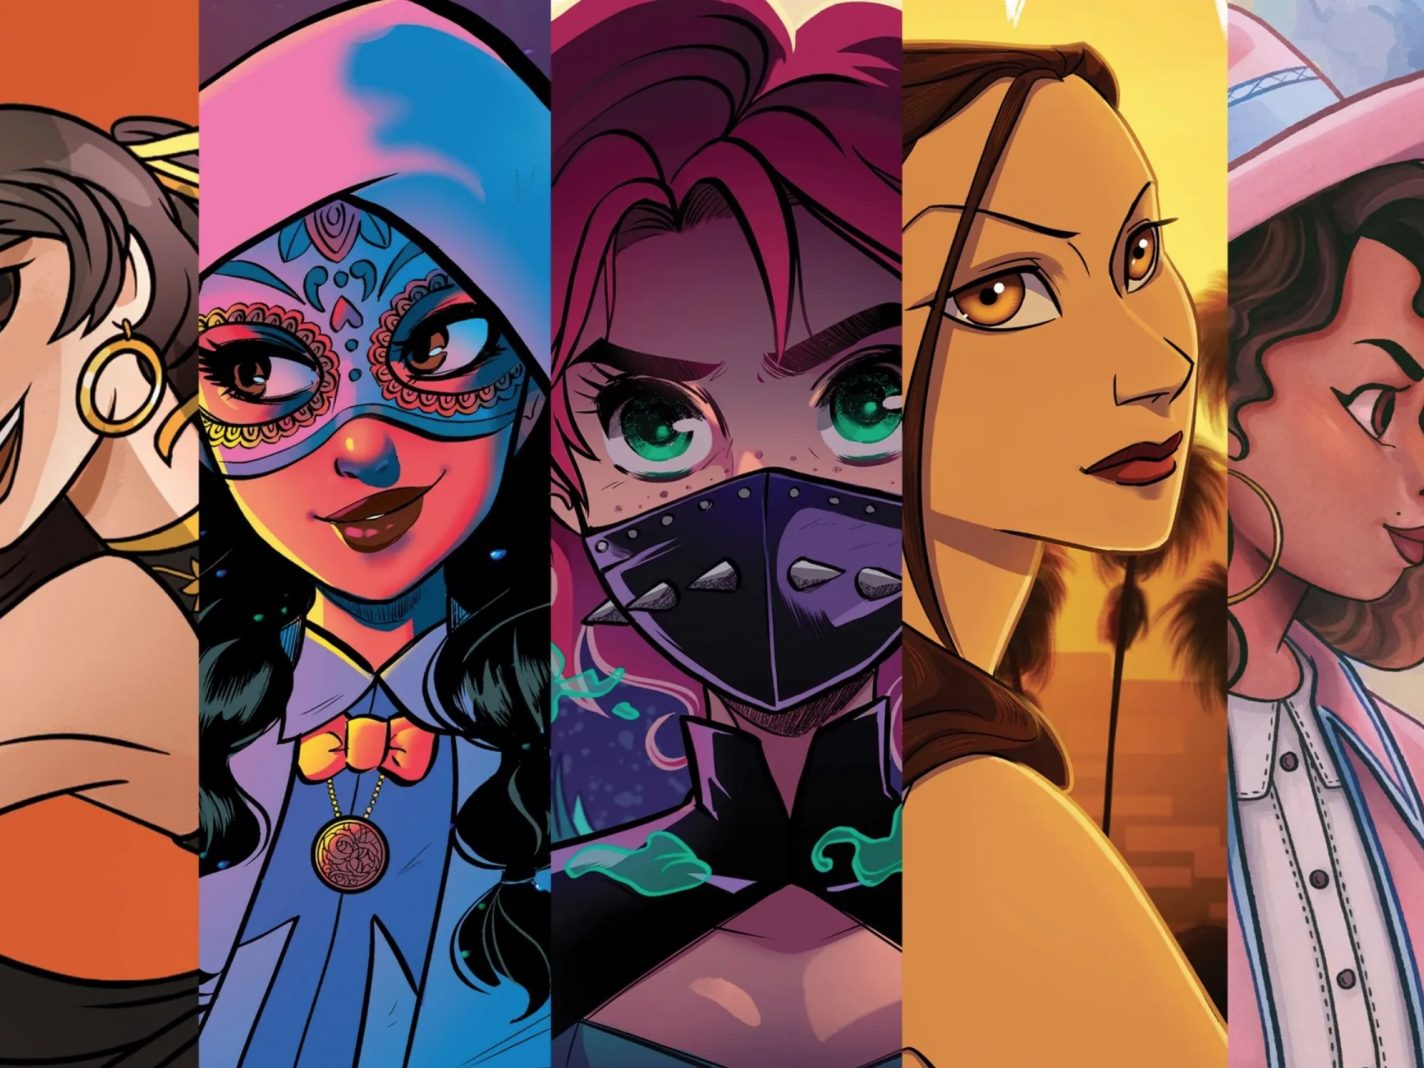 This Writer Created Her Own Latine Superhero Universe in Graphic Novels